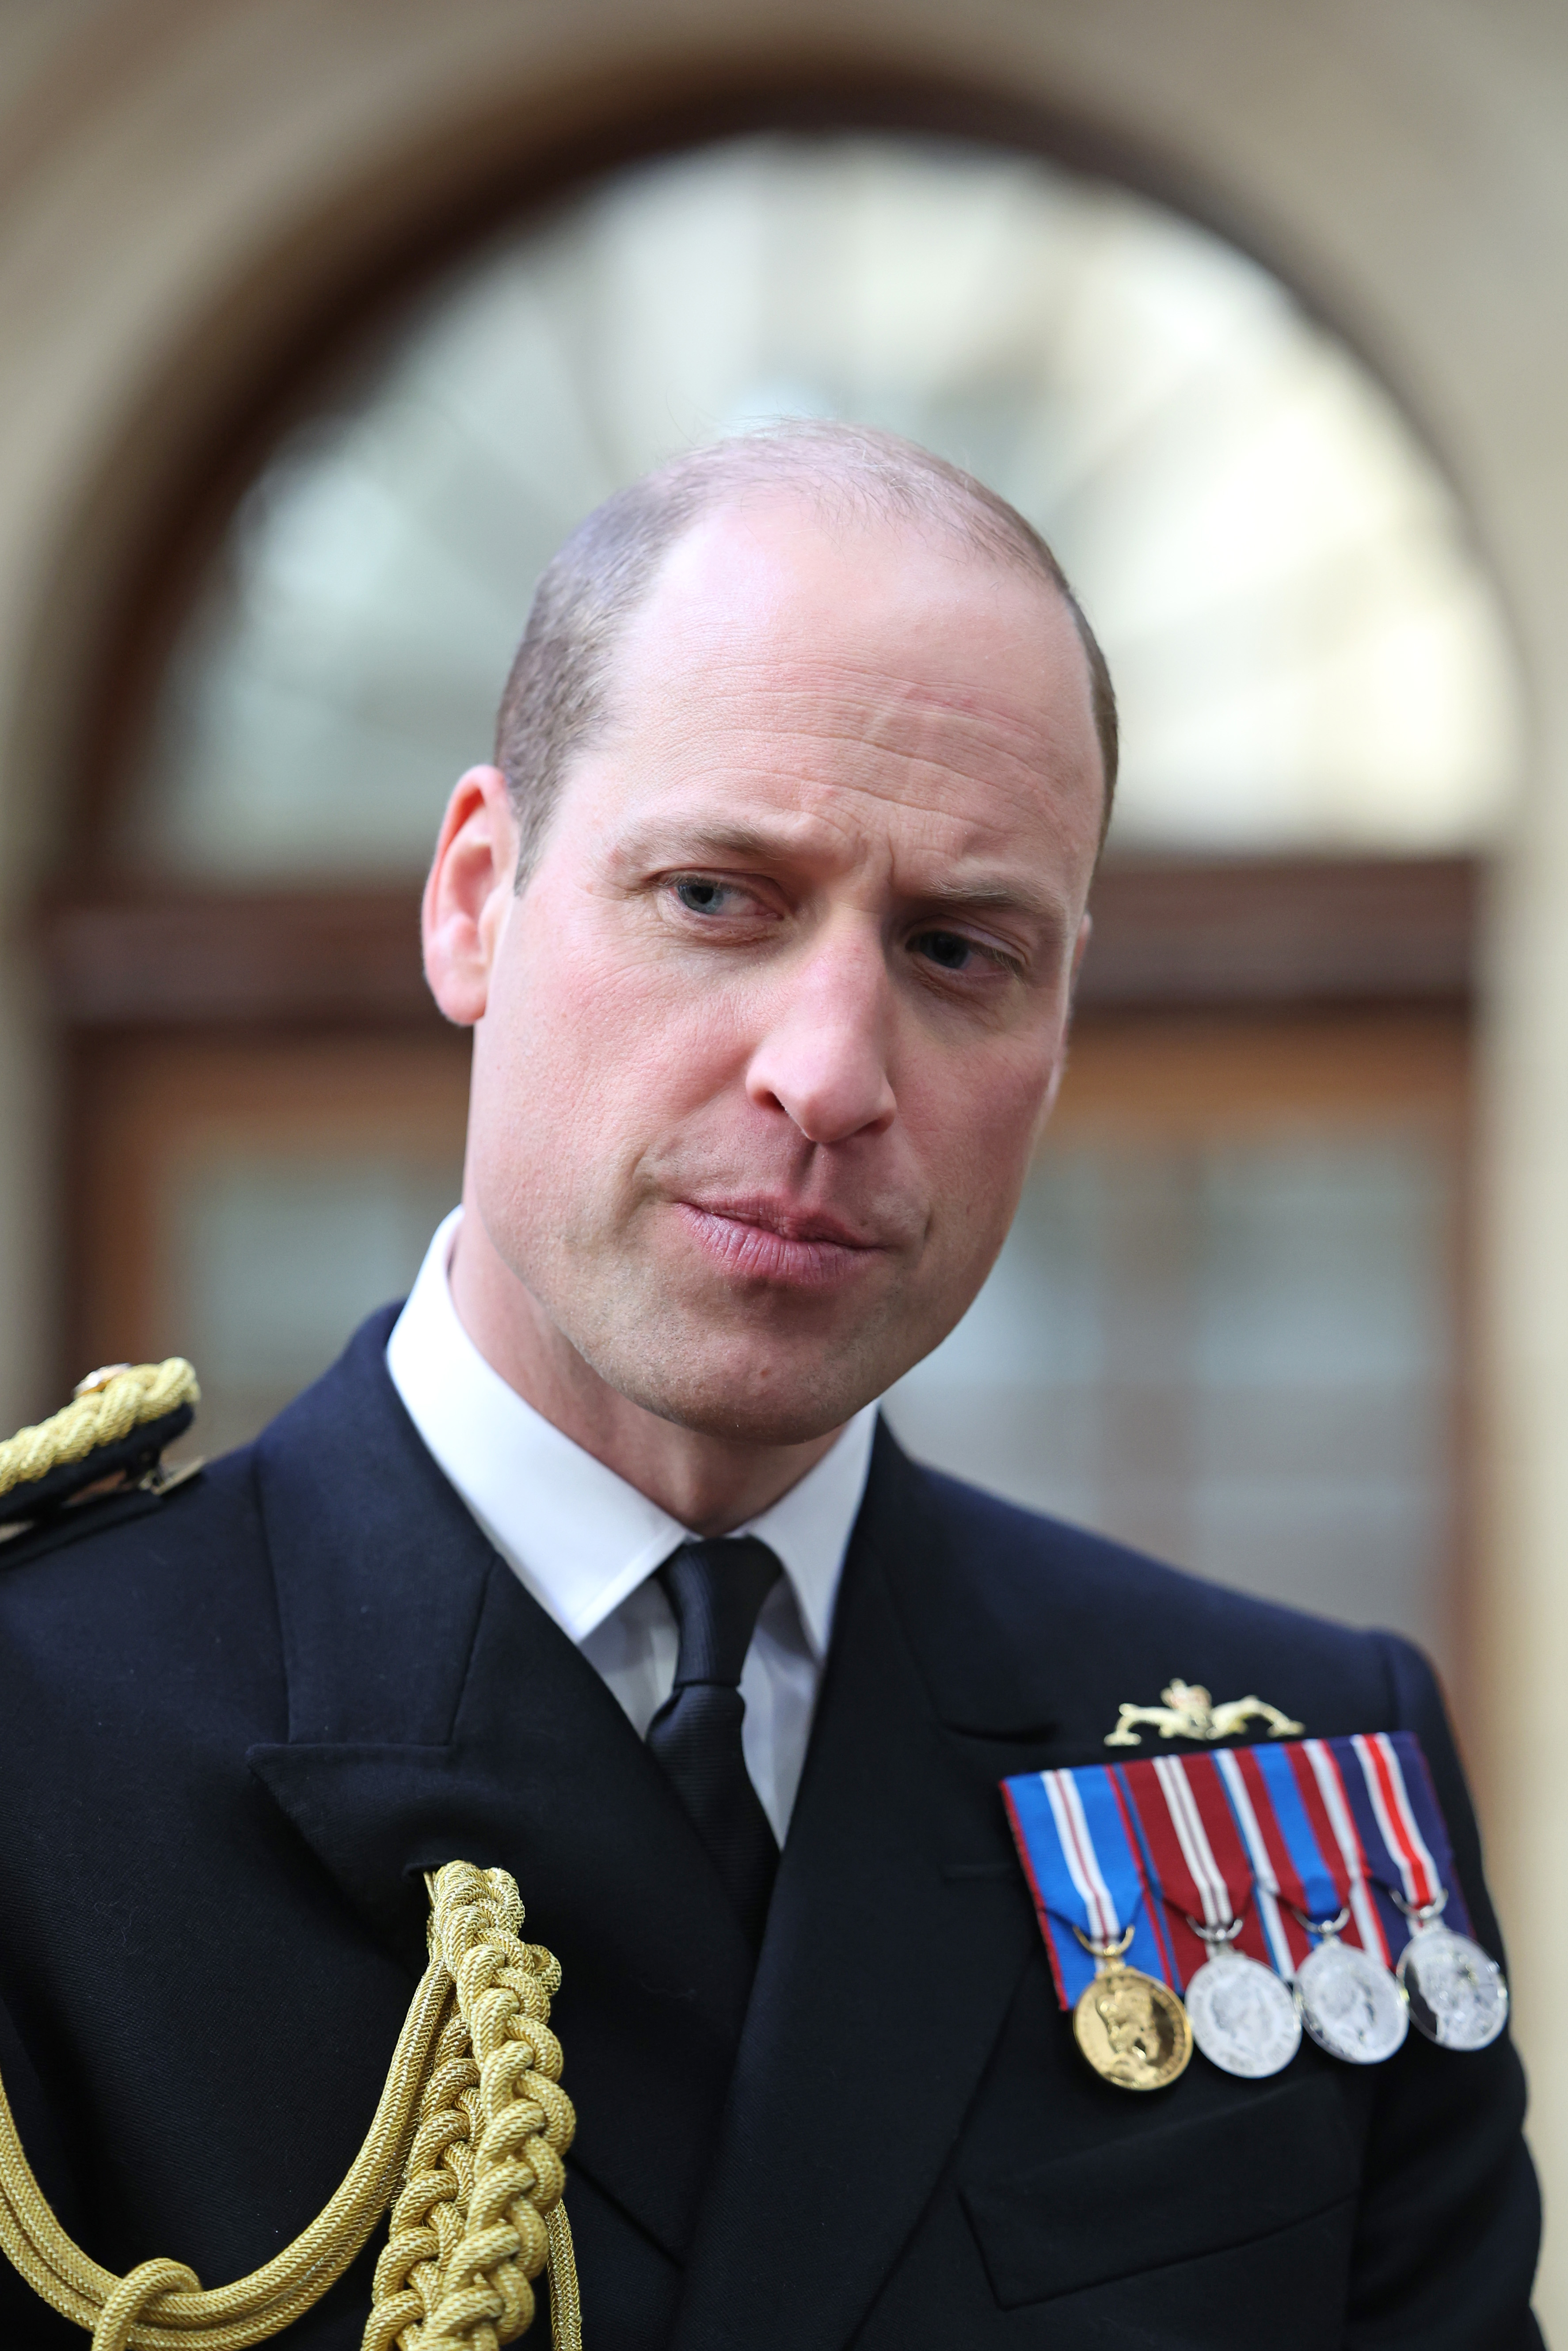 Prince William at The Lord High Admiral's Divisions event in Dartmouth, England on December 14, 2023 | Source: Getty Images